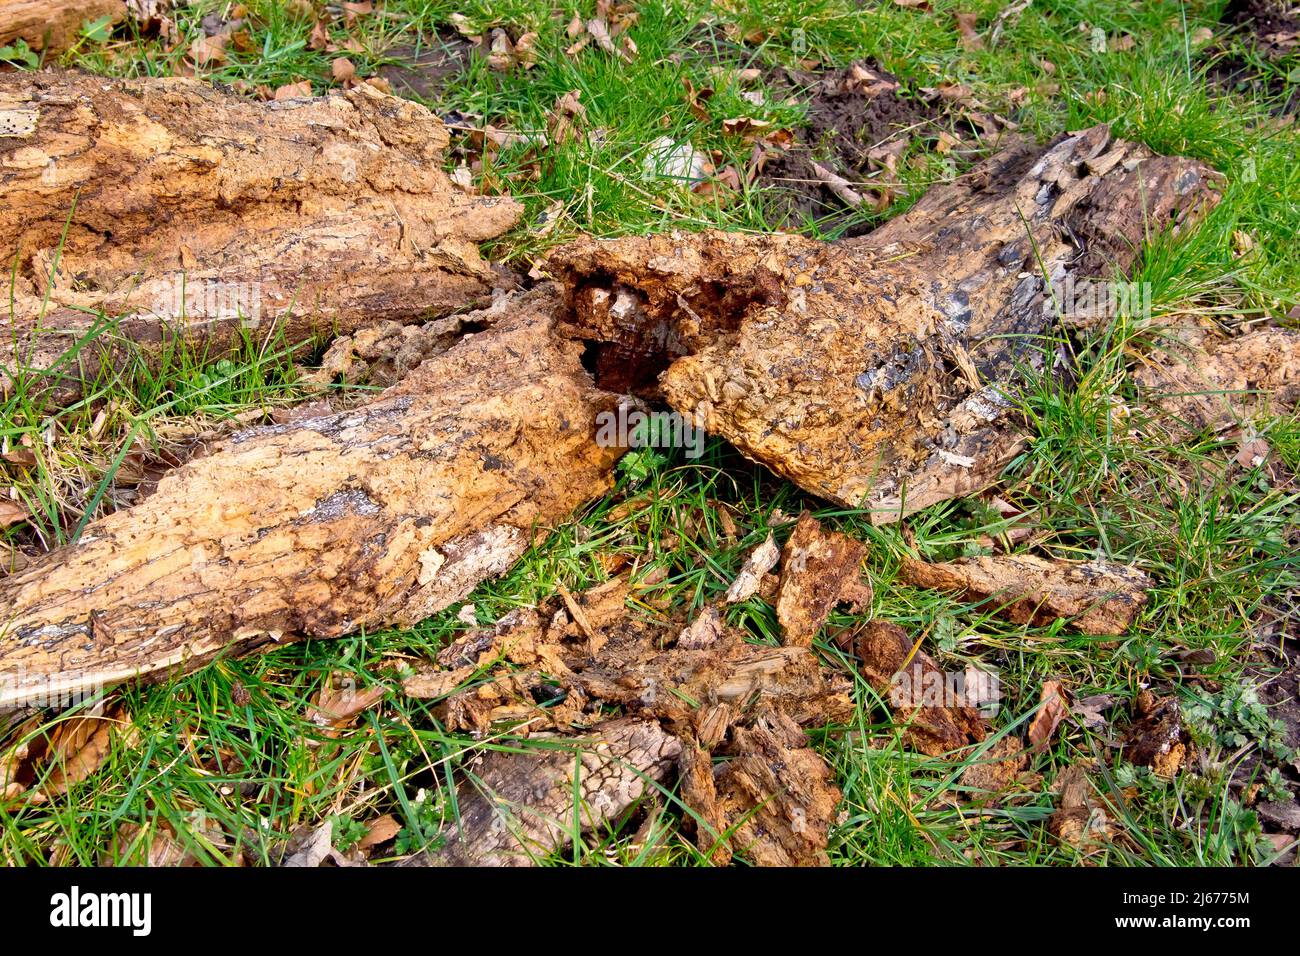 Logs from a fallen tree left to rot and decay on the grass at the edge of a field. Stock Photo